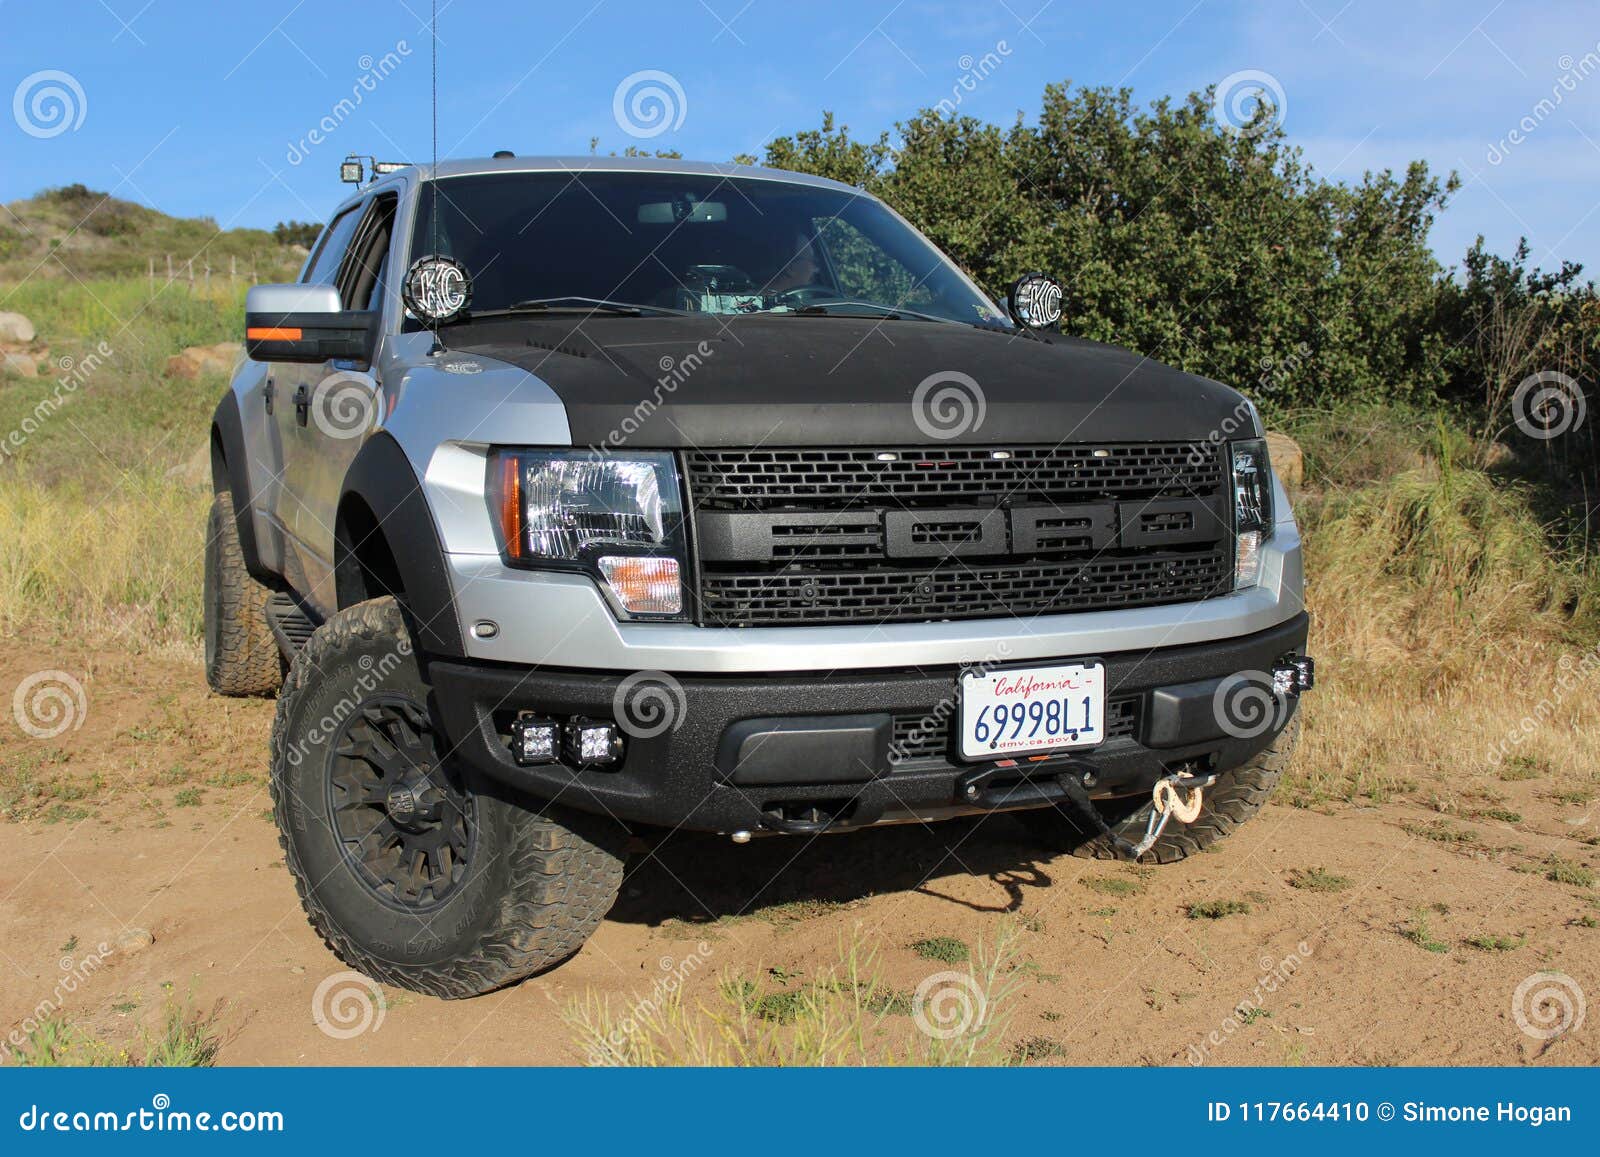 how to Raptor by Adventure Truck